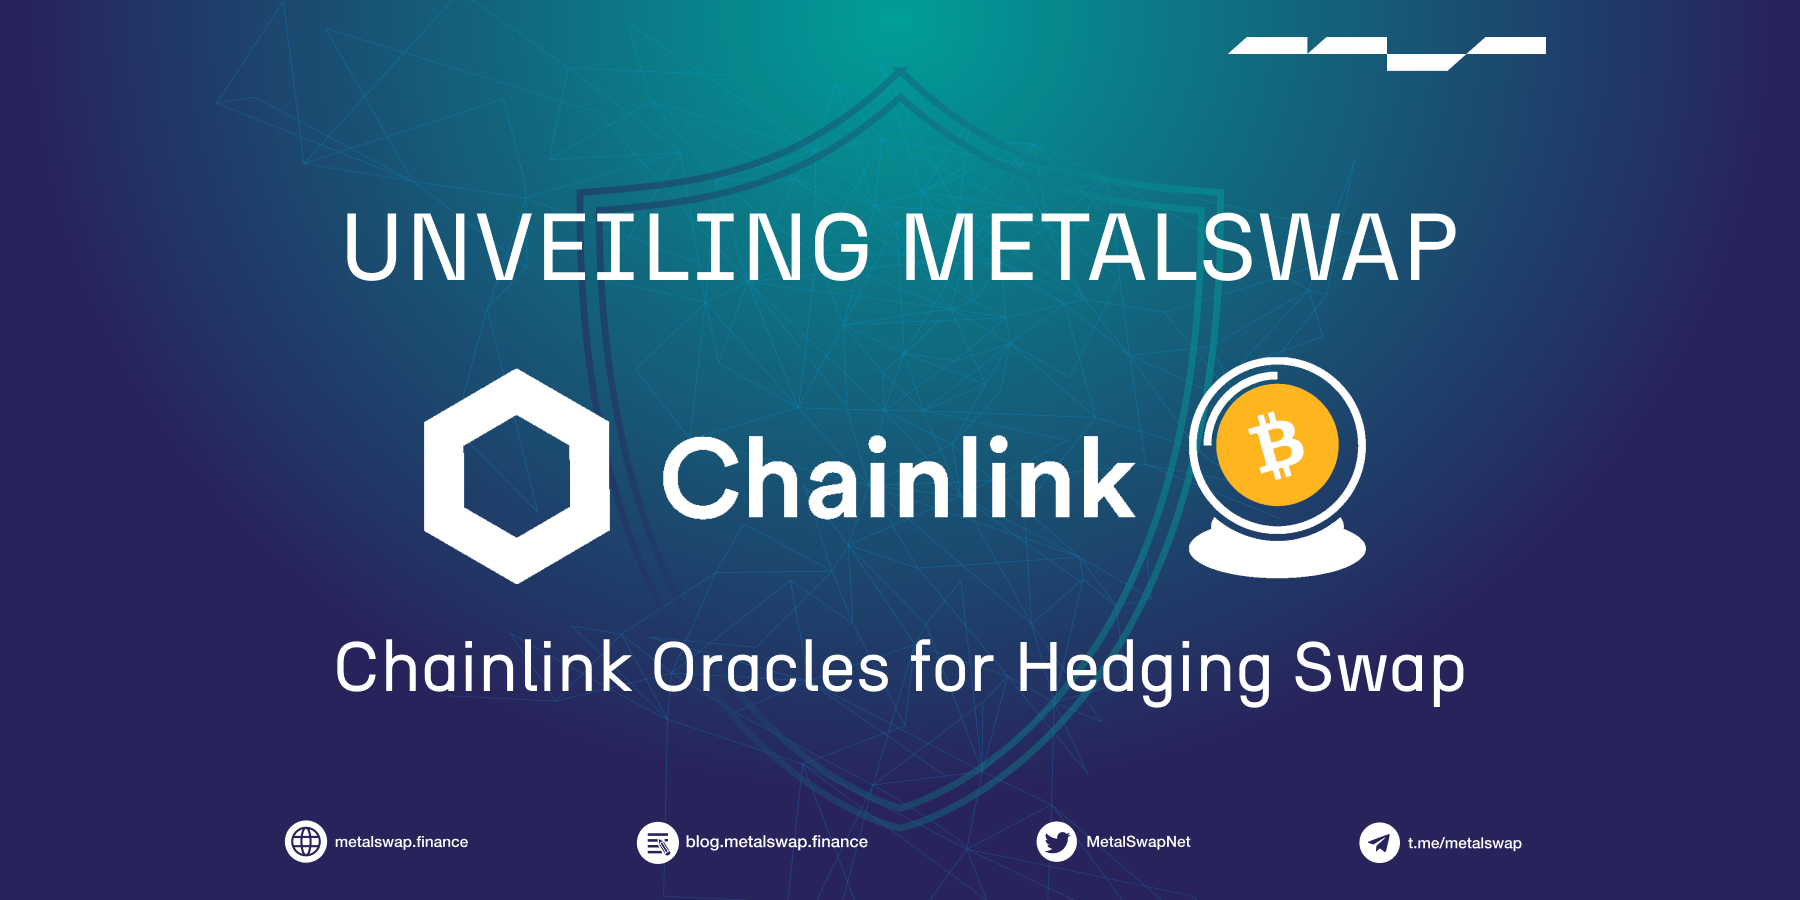 Chainlink Oracles for Hedging Swap